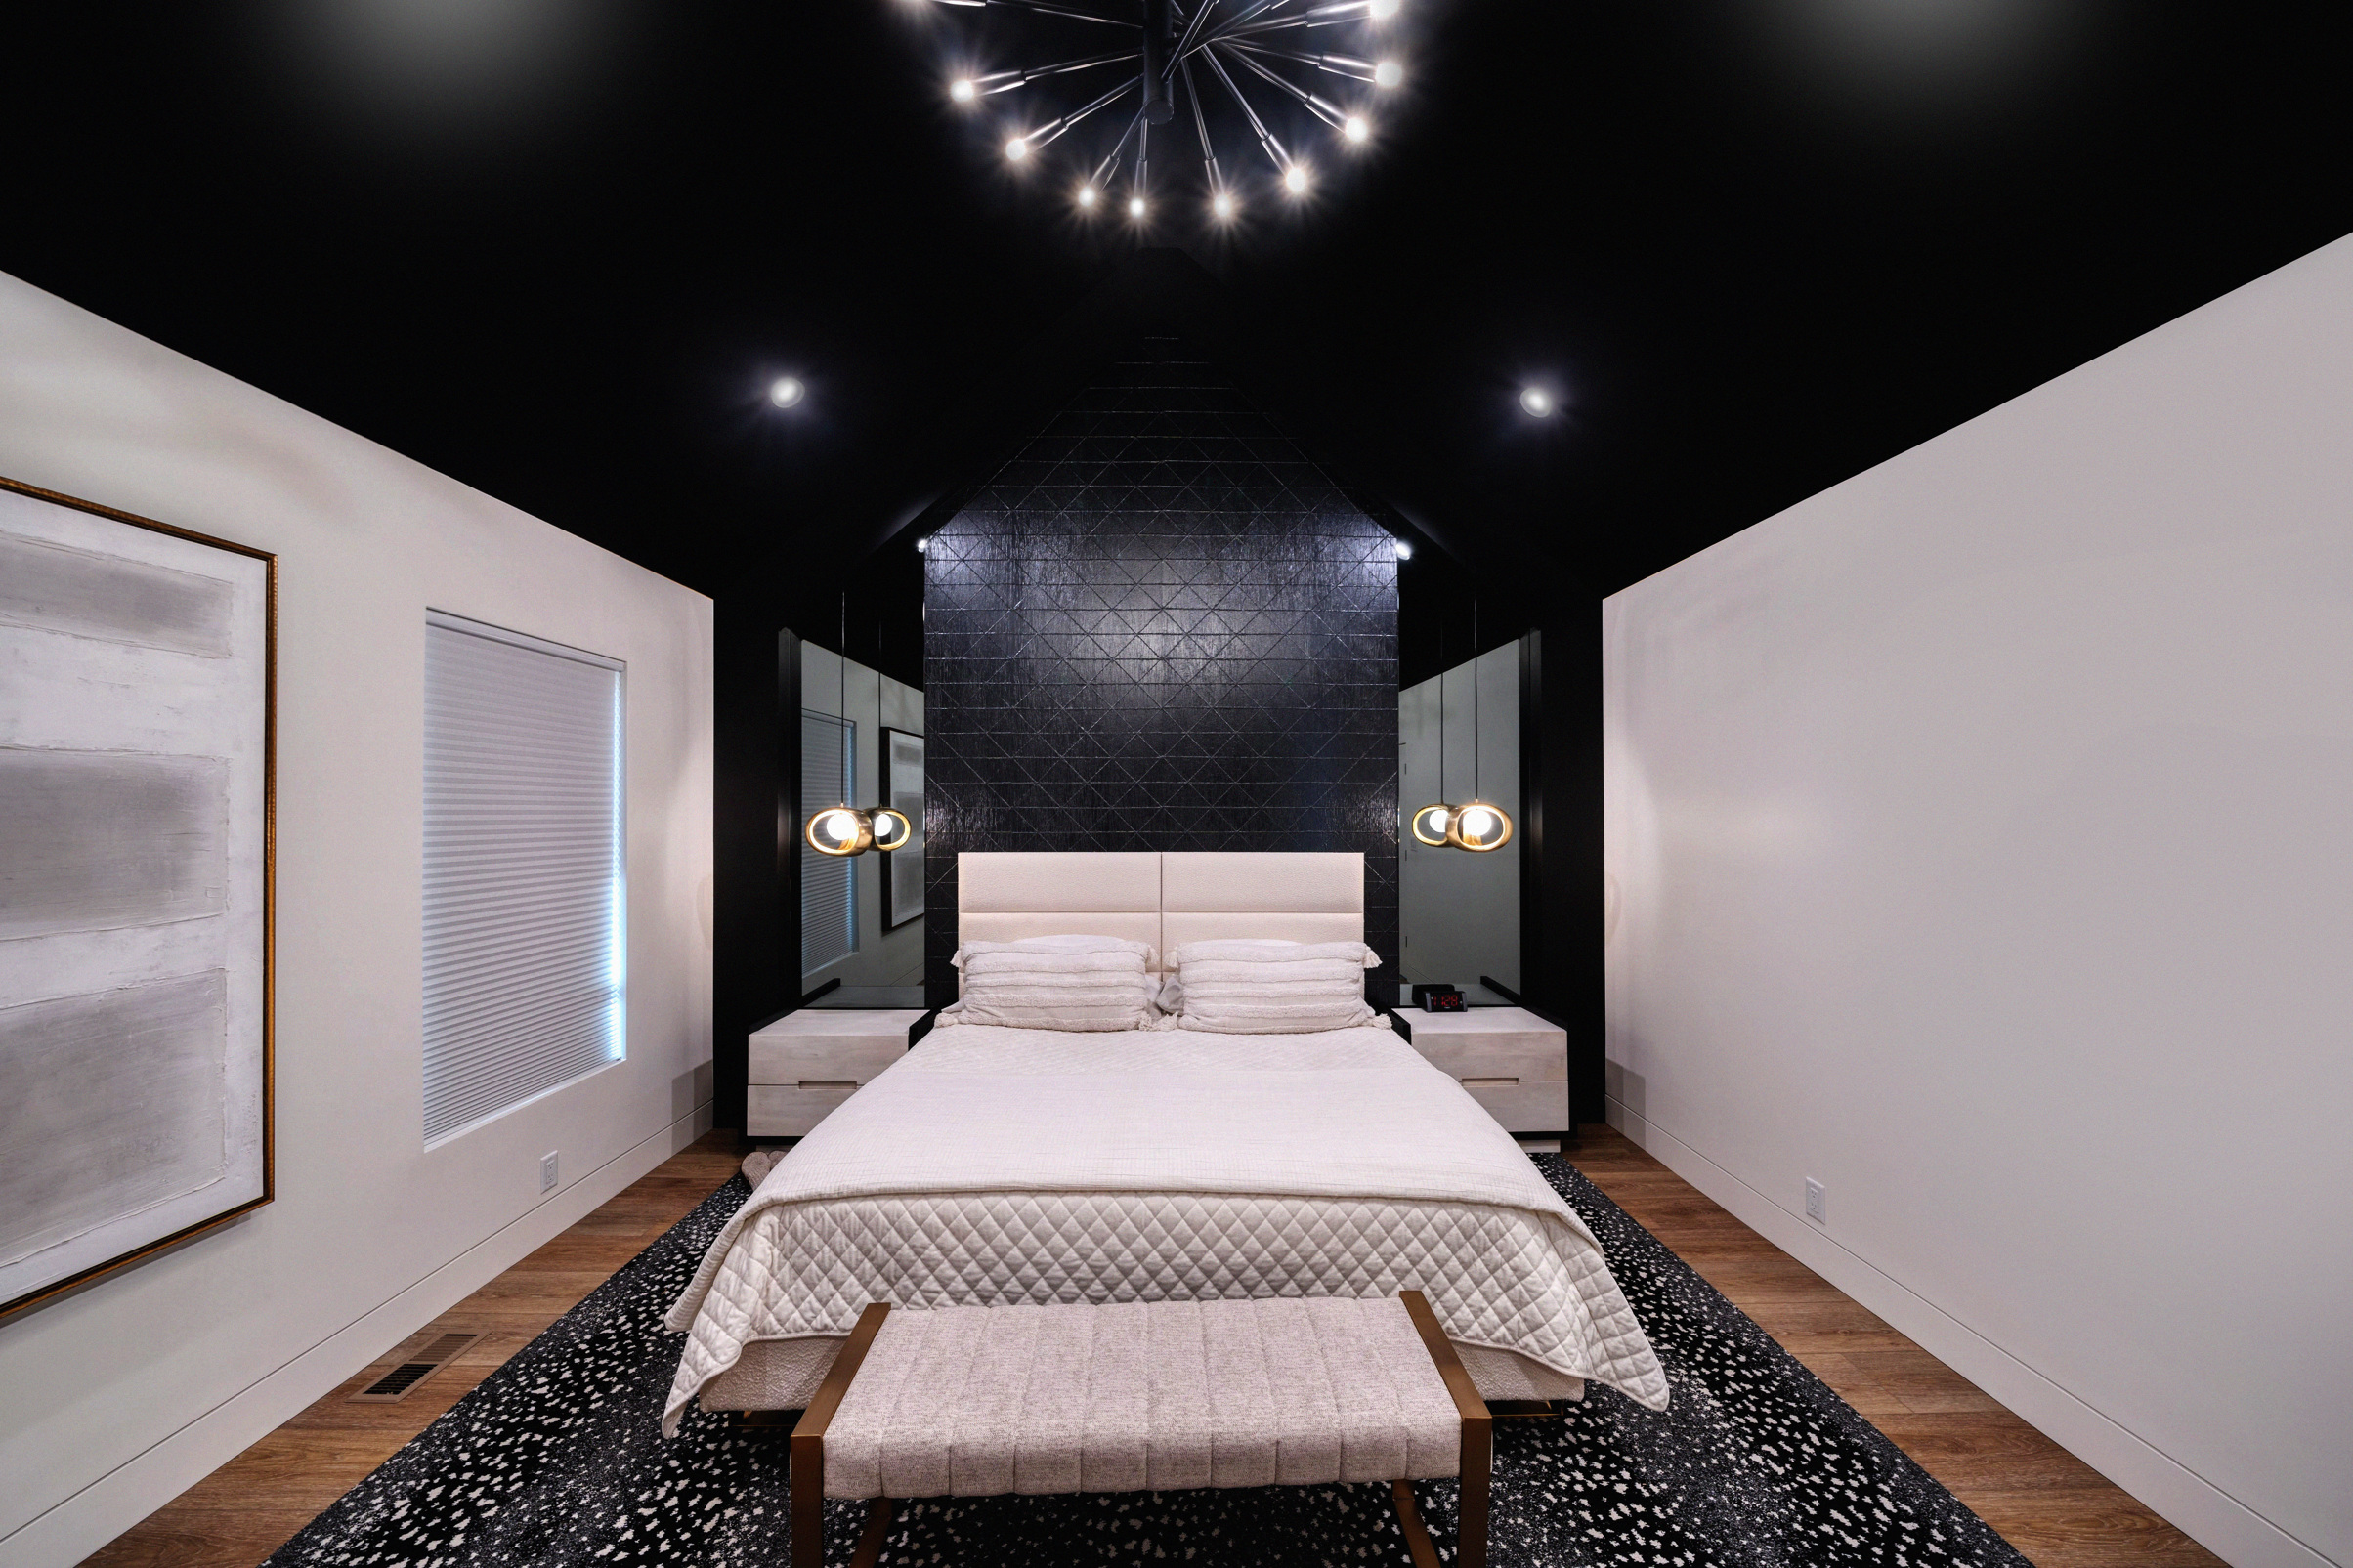 Remodeled modern bedroom with black ceiling & white walls with recessed lighting and chandelier.